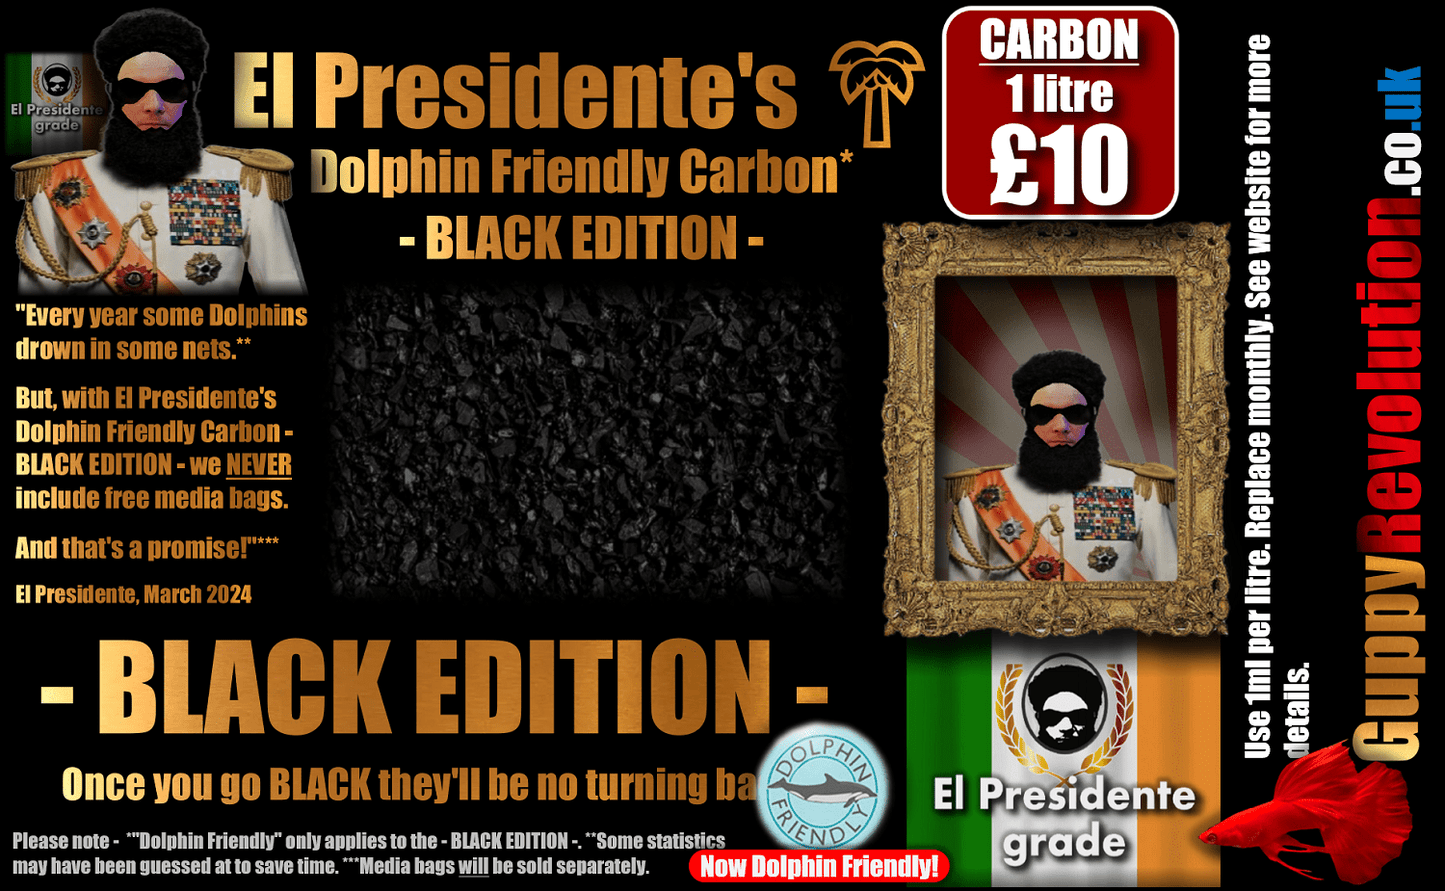 El Presidente's Dolphin Friendly Carbon - BLACK EDITION - 1 Litre £10. - Suitable for freshwater & marine.